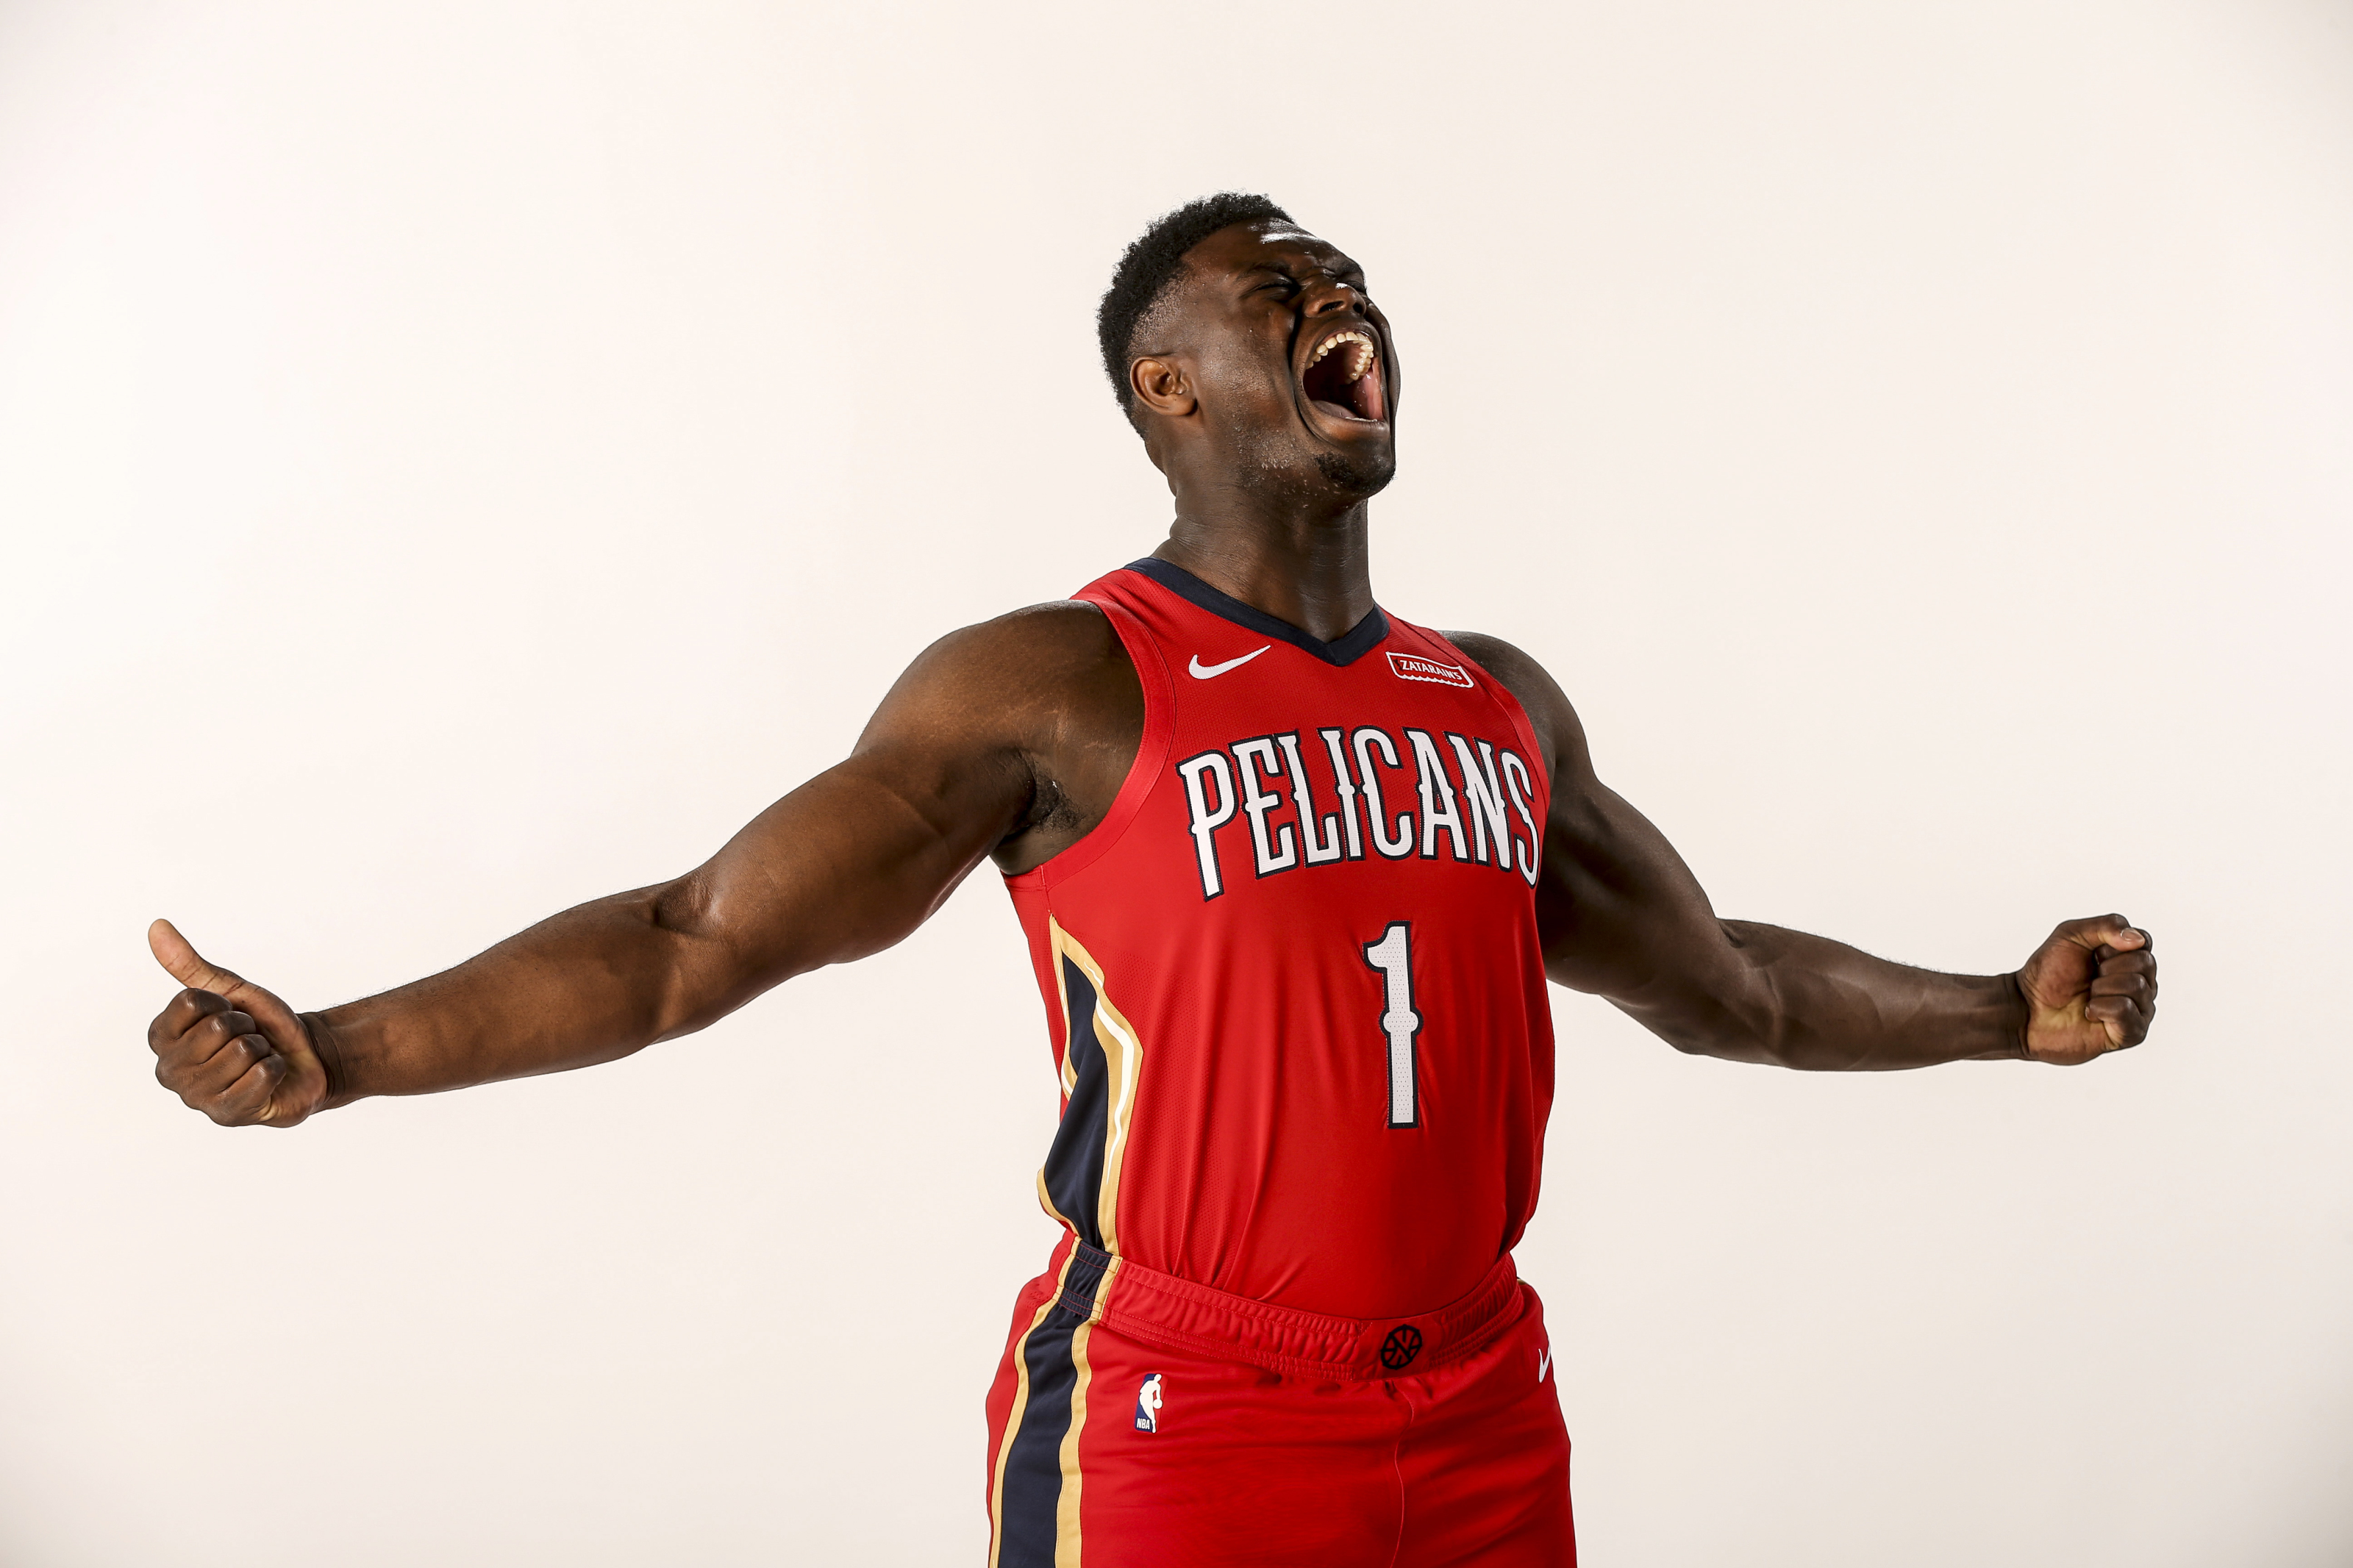 New Orleans Pelicans on X: The #Pelicans will hold an